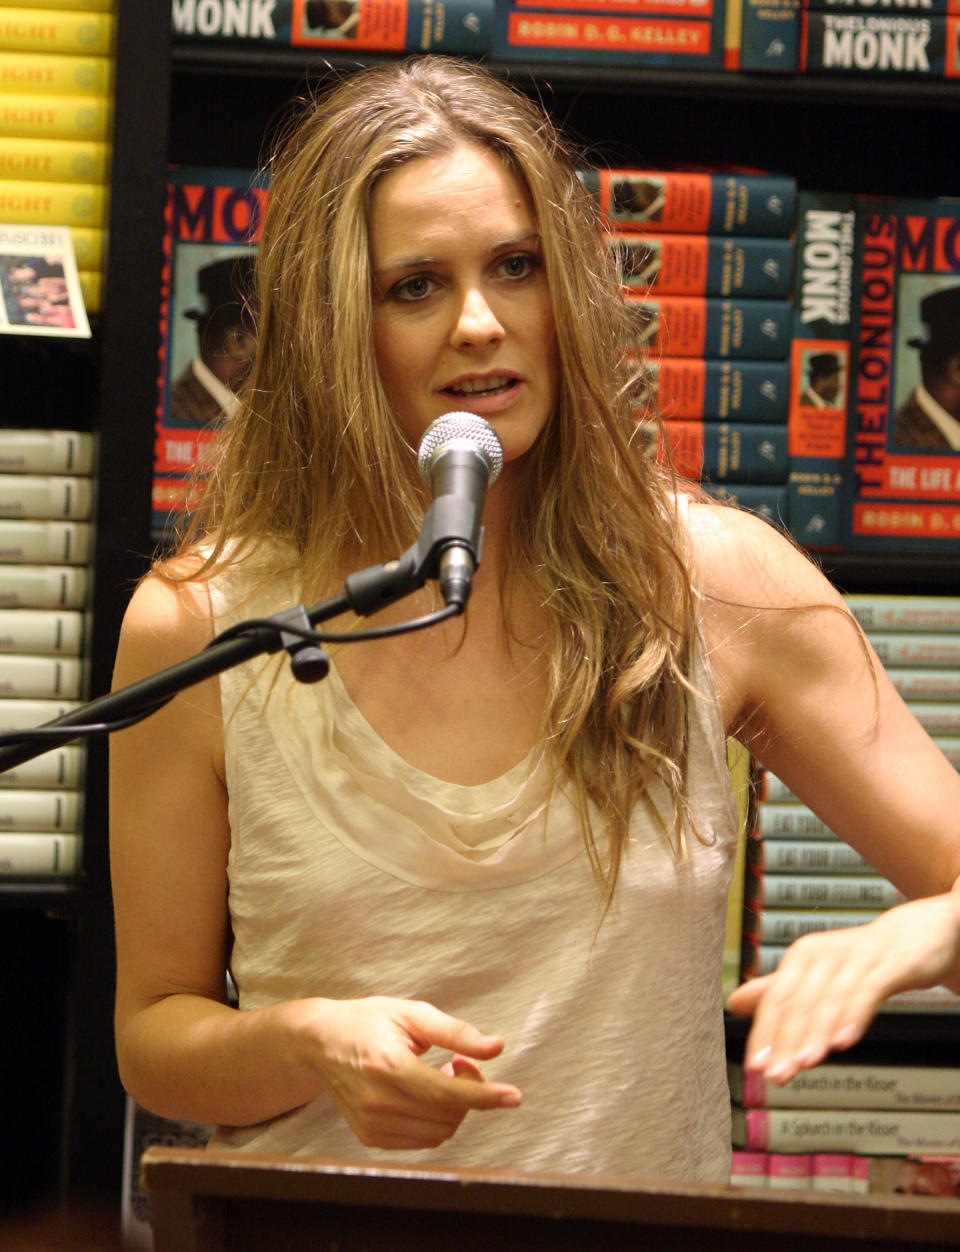 Alicia Silverstone Book Signing For "The Kind Diet"